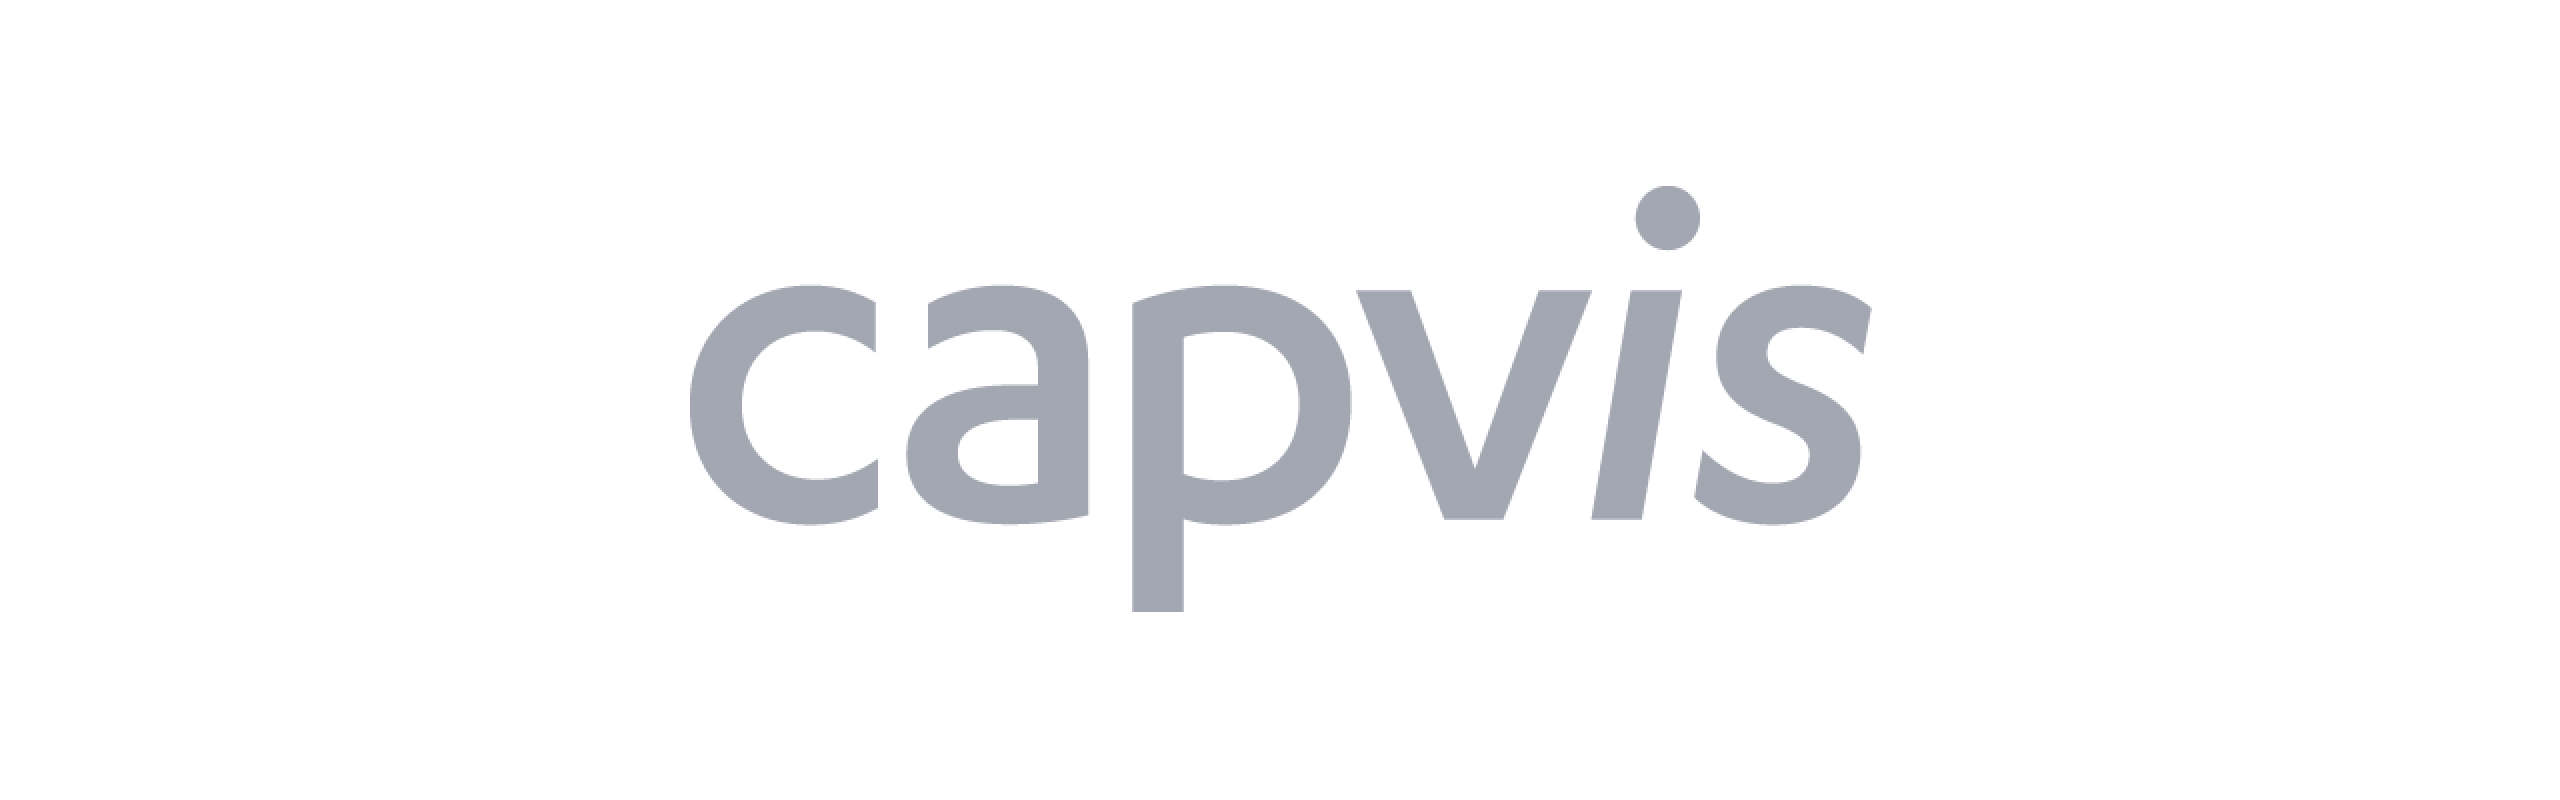 Technology & product due diligence | Code & Co. advises CAPVIS AG (logo shown)